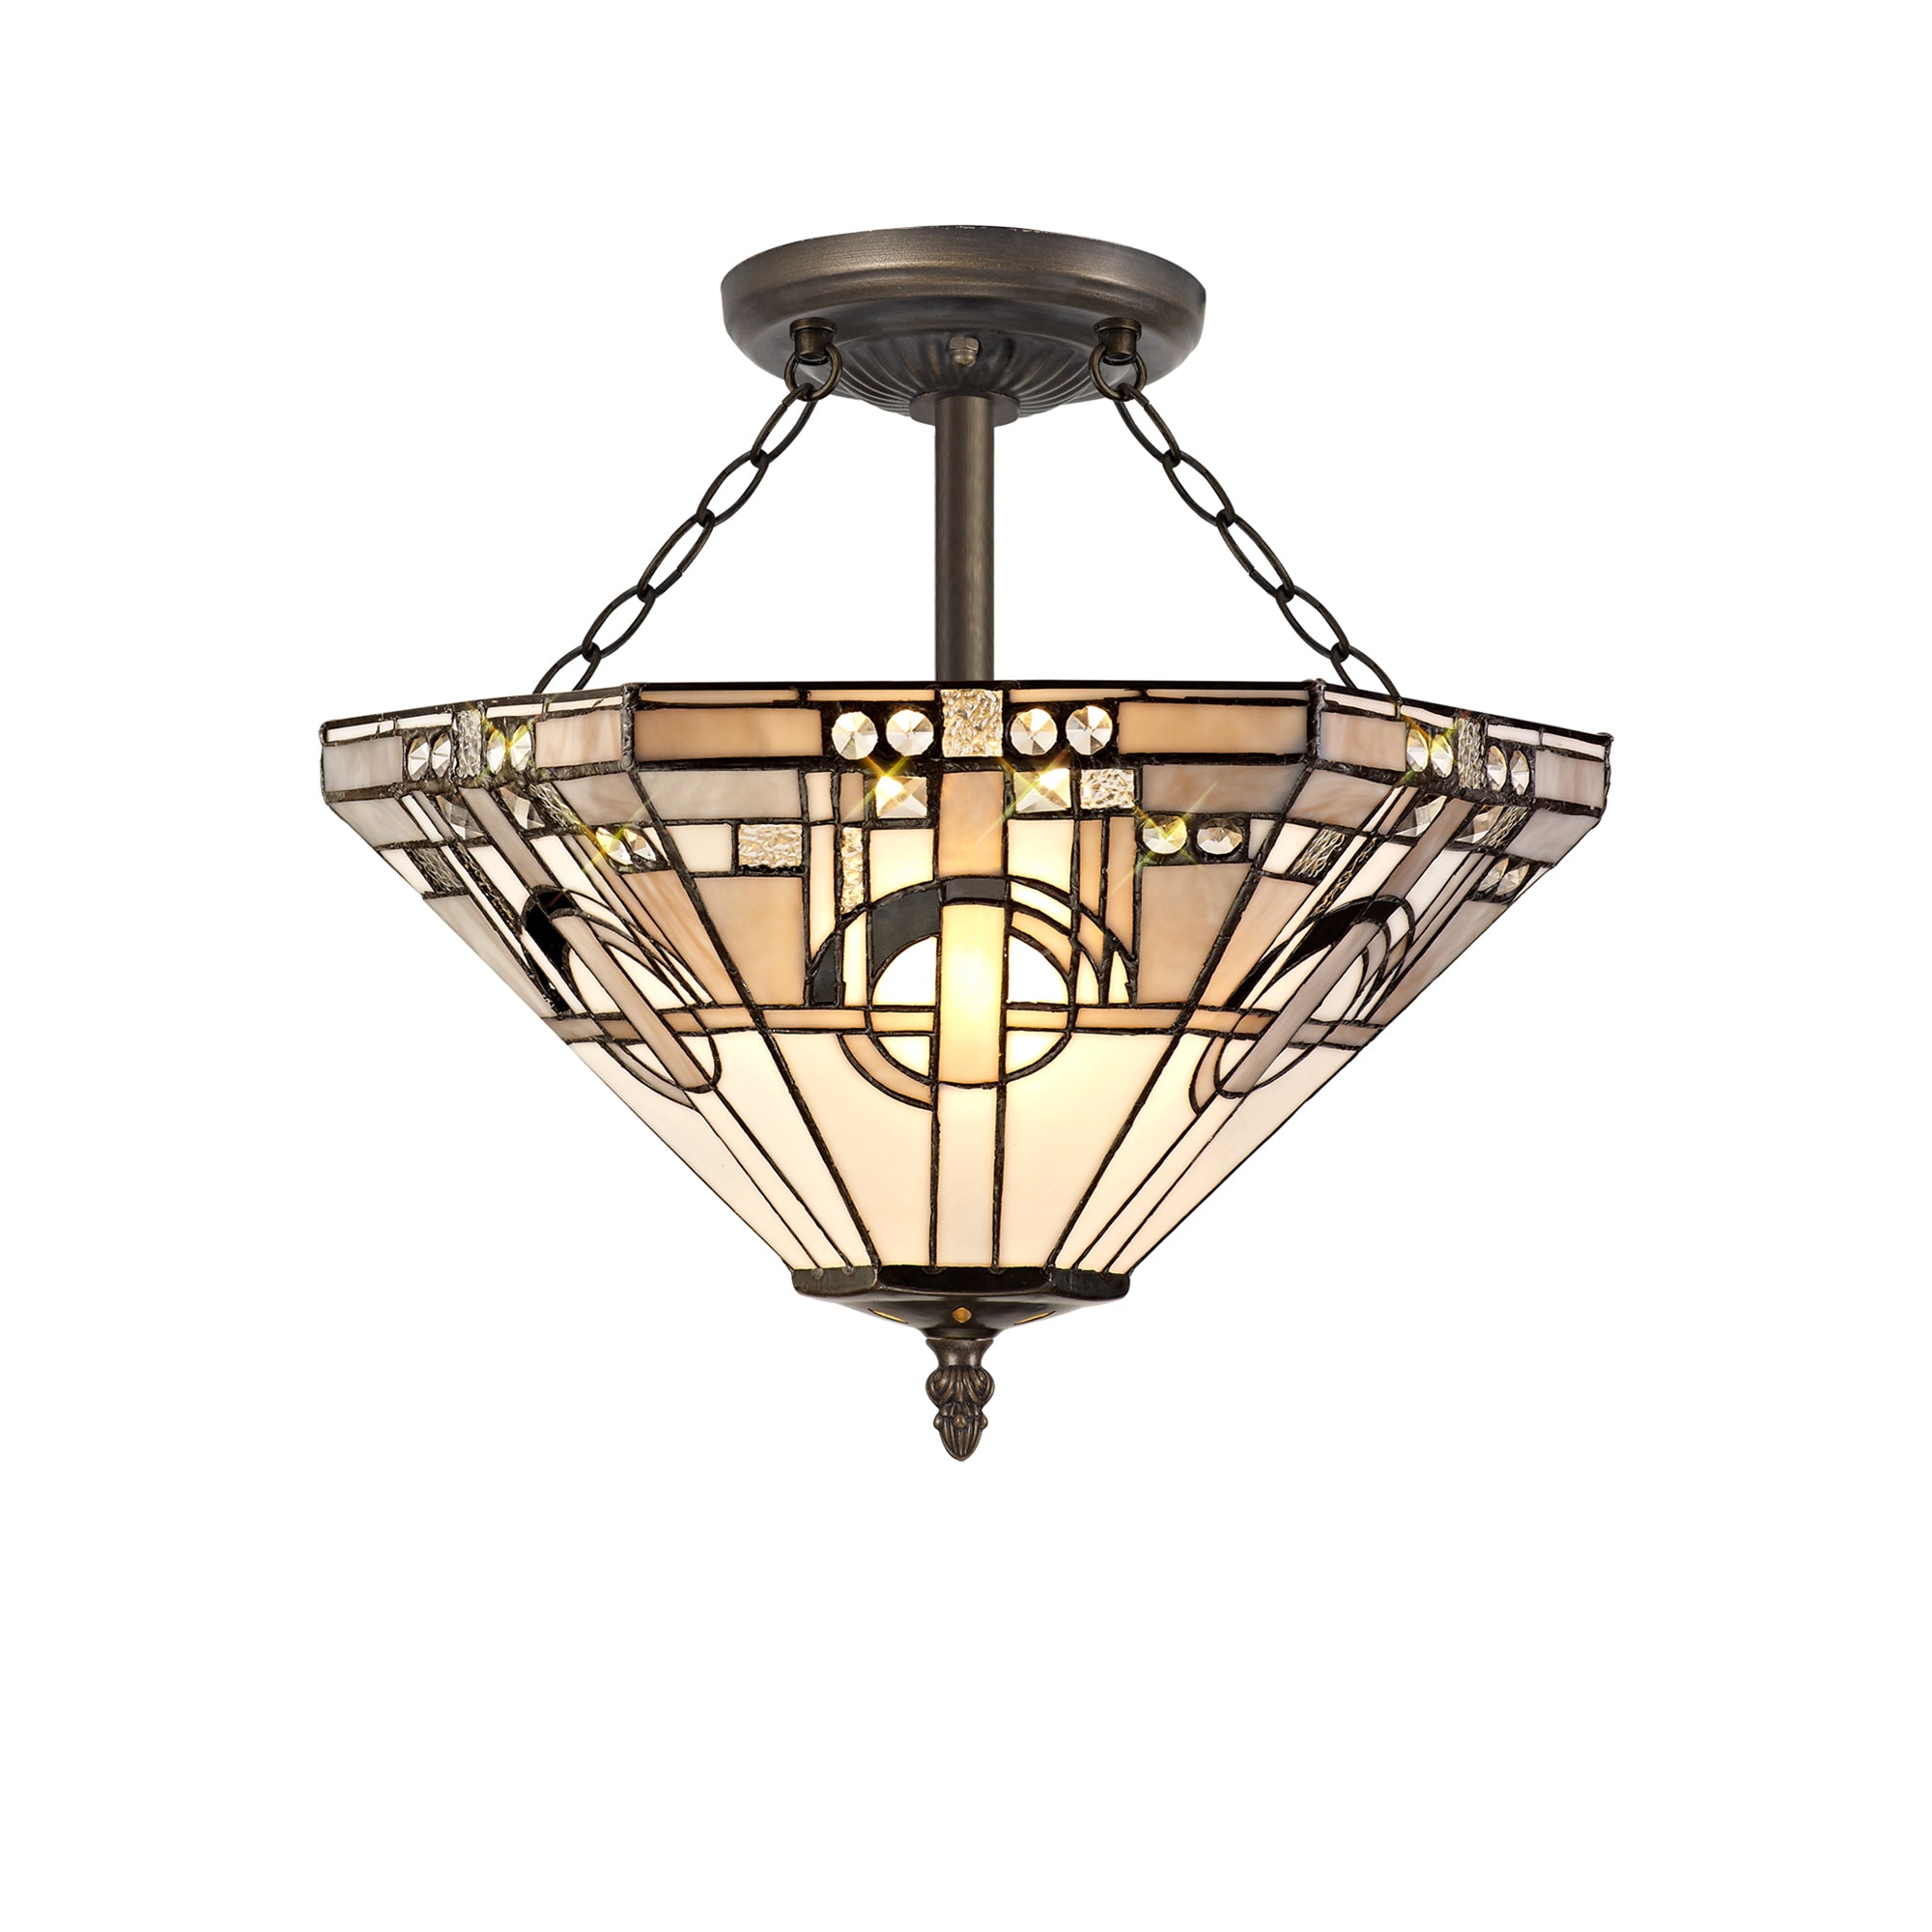 Atek 3 Light E27 Semi Ceiling With Tiffany Shade 40cm Shade, White/Grey/Black/Clear Crystal/Aged Antique Brass